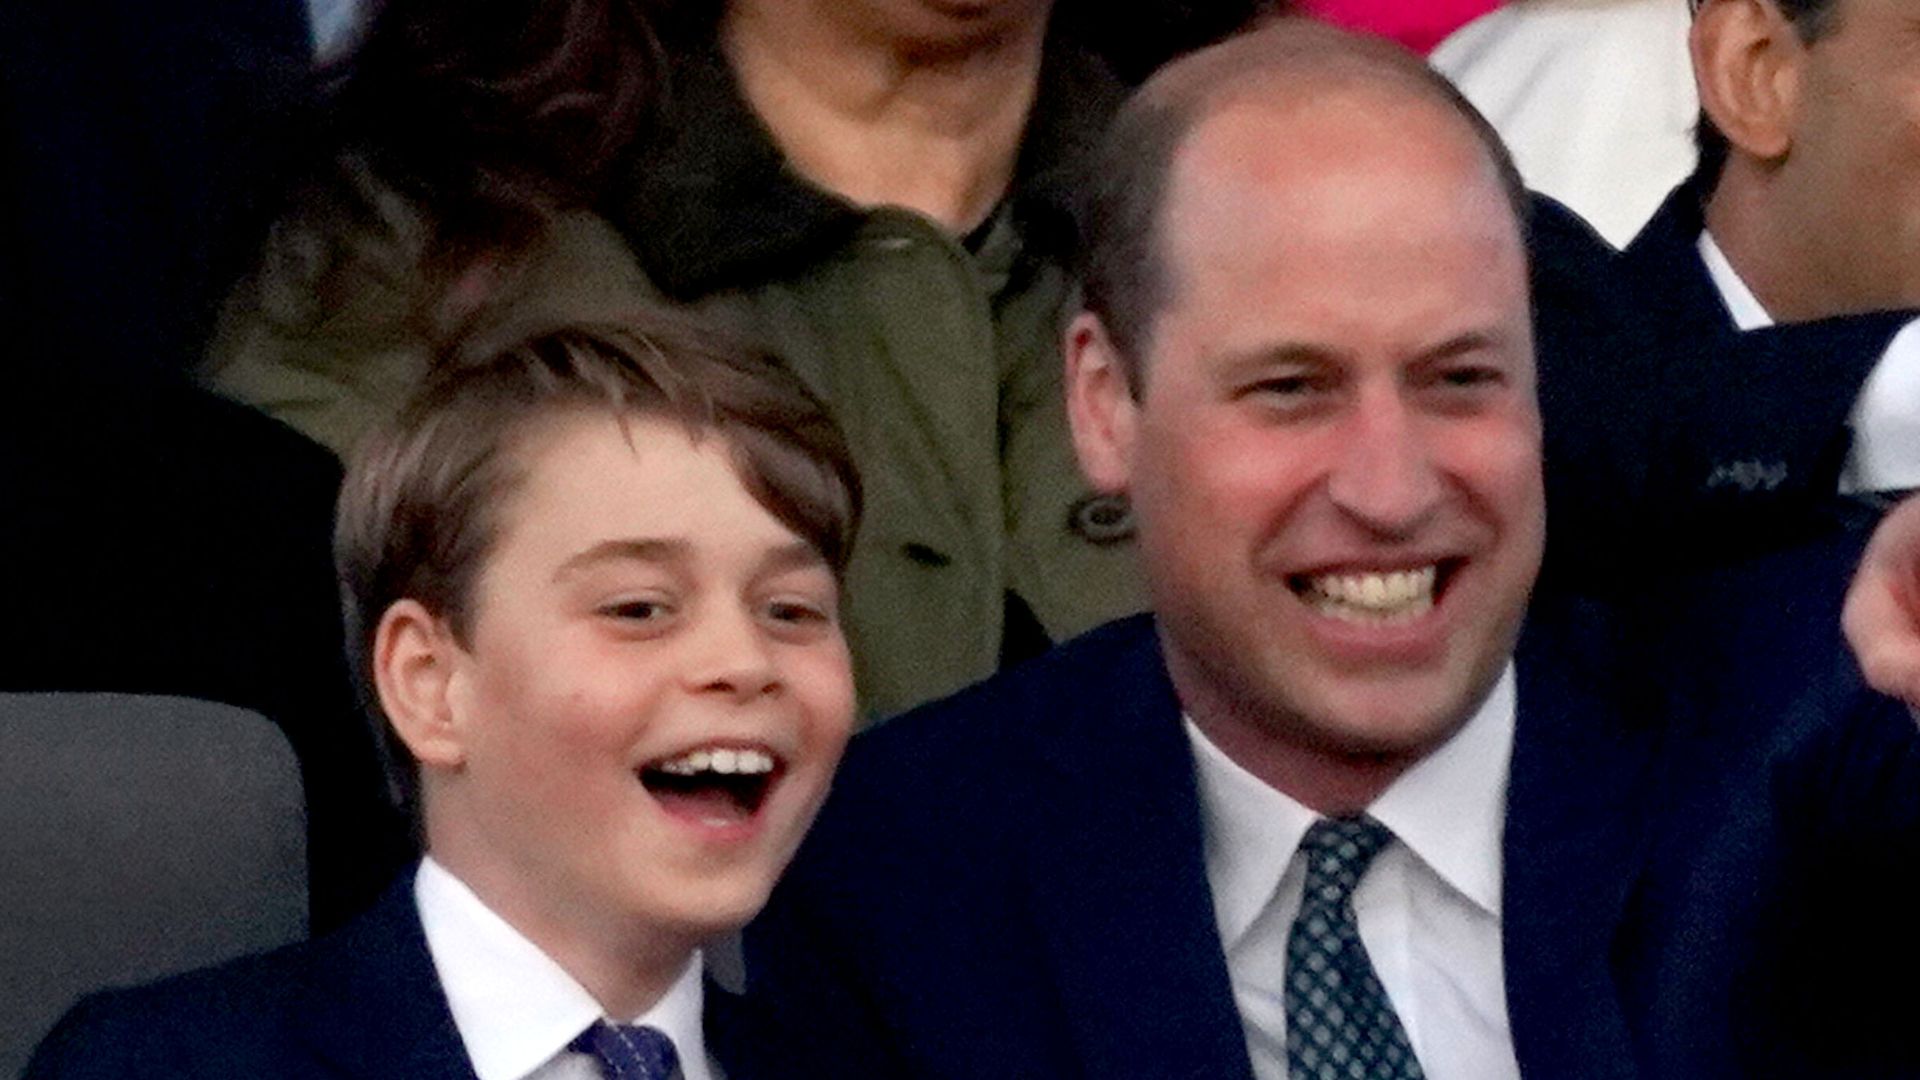 Prince George and Prince William attend the Coronation Concert held in the grounds of Windsor Castle